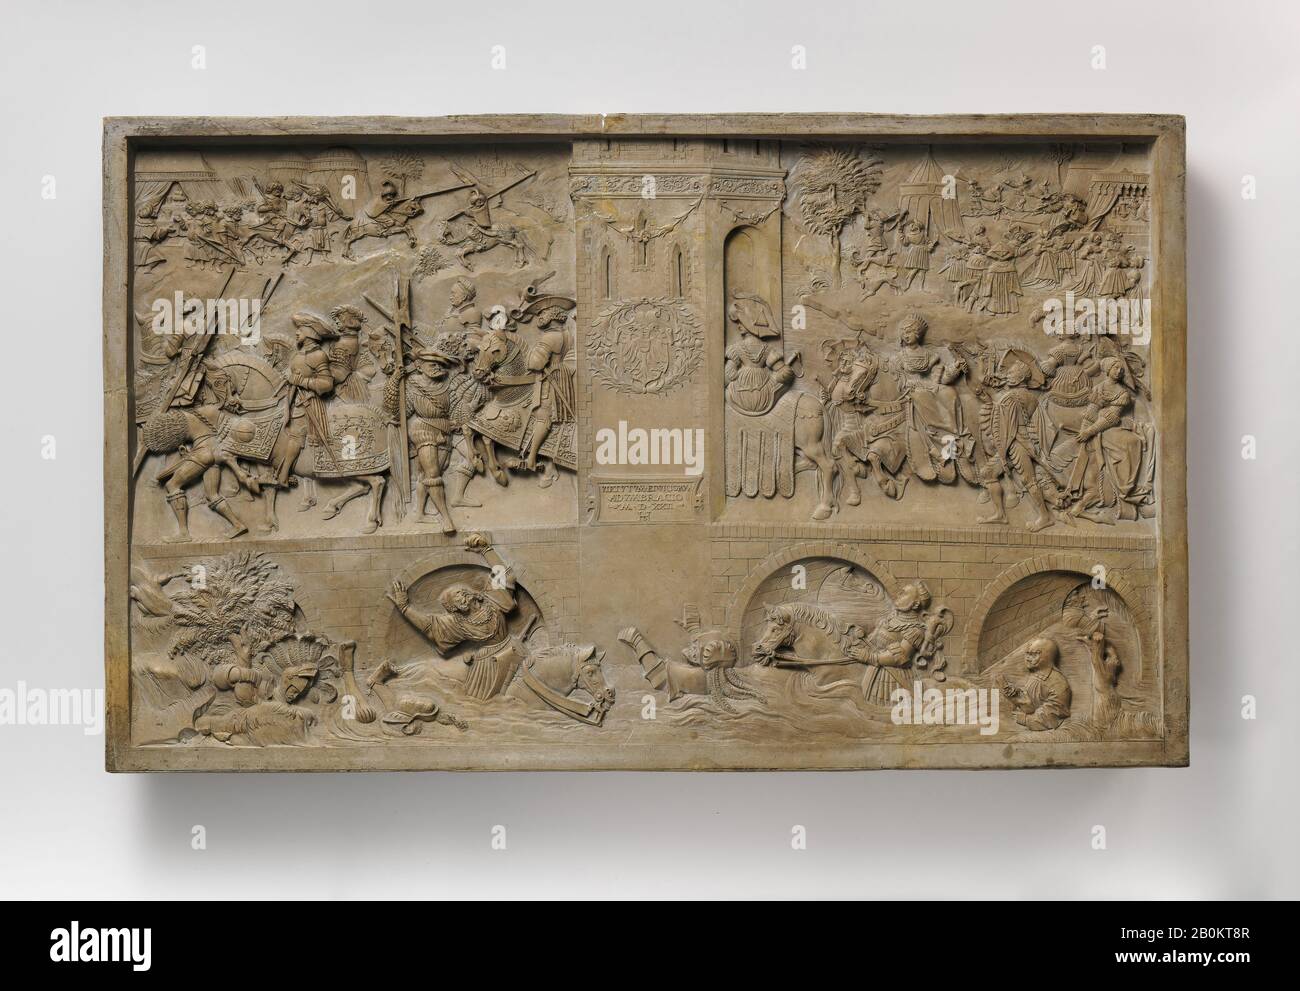 Hans Daucher, Allegory of Virtues and Vices at the Court of Charles V, German, probably Augsburg, Hans Daucher (German, Ulm ca. 1485–1538 Stuttgart), ca. 1522, German, probably Augsburg, Honestone (Jurassic limestone), traces of gilding, Overall: 11 1/8 × 18 7/16 × 1 3/4 in. (28.3 × 46.8 × 4.4 cm), Sculpture-Miniature Stock Photo